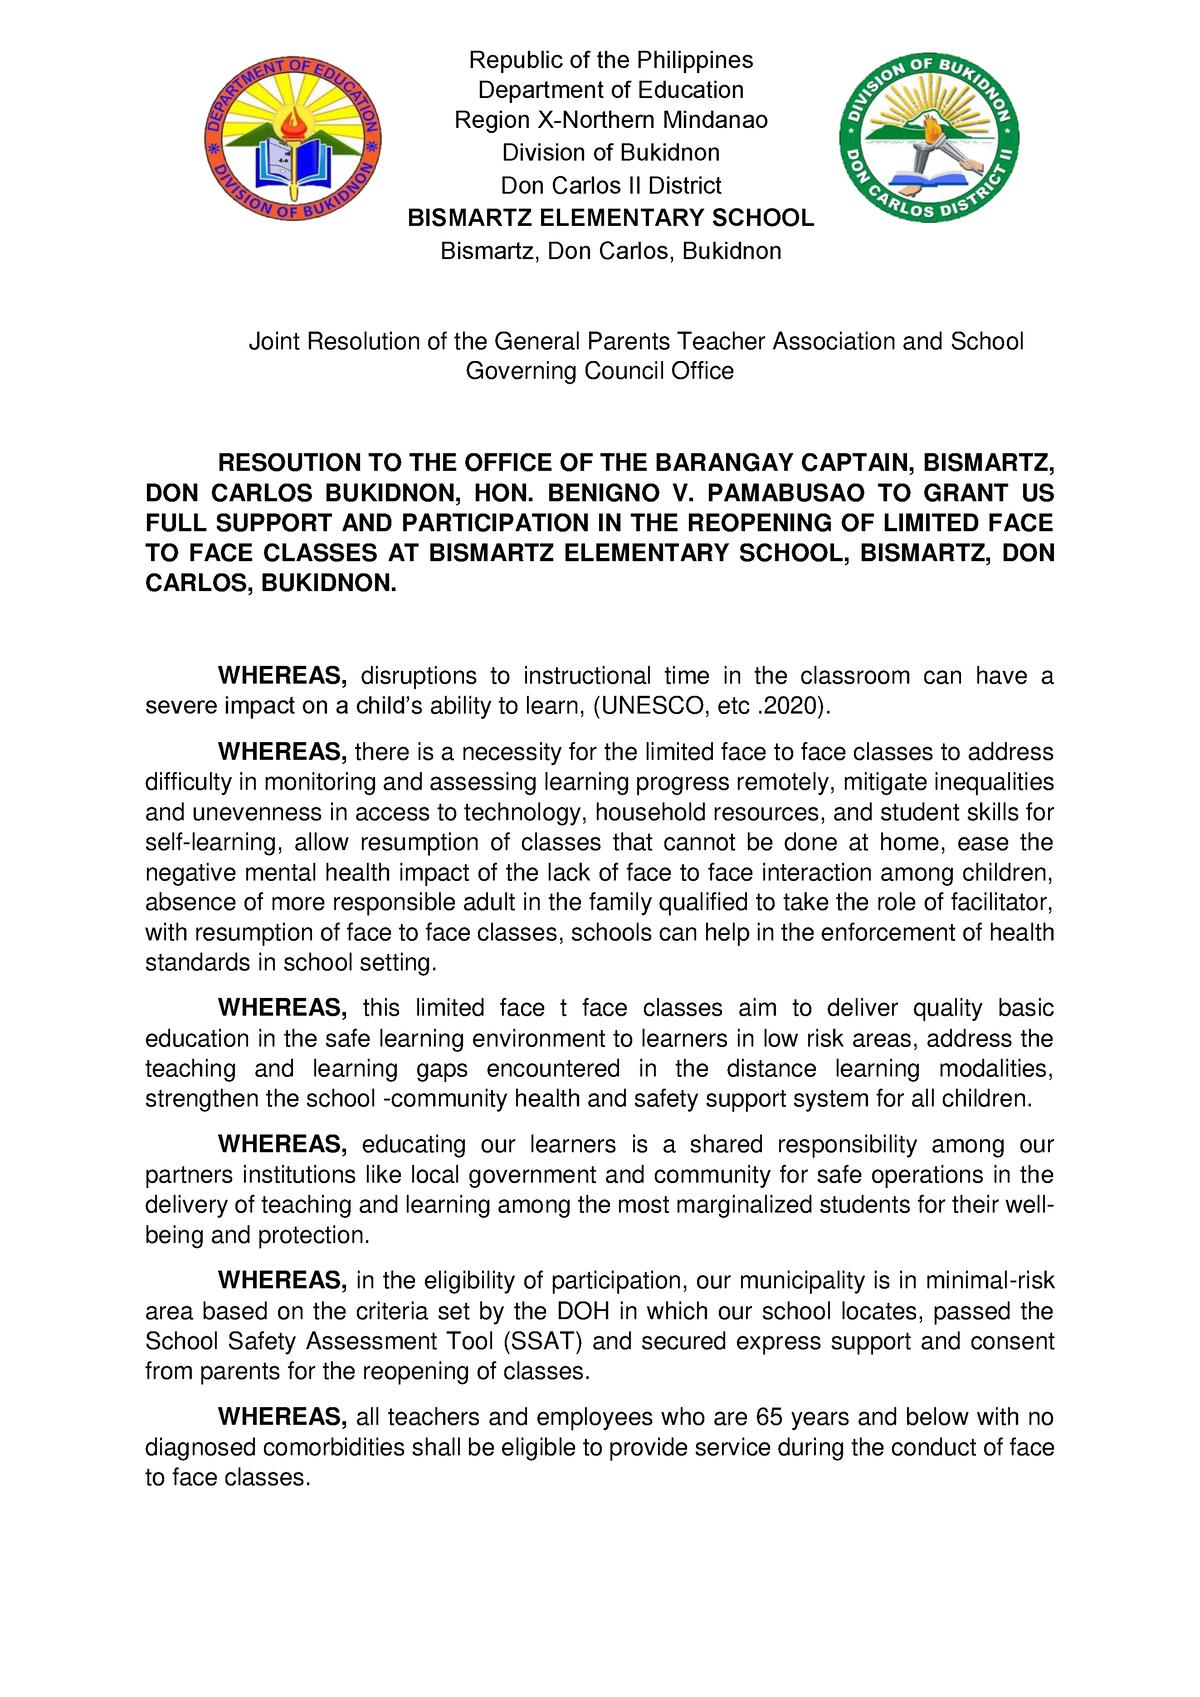 Joint Resolution of the General Parents Teacher Association and School